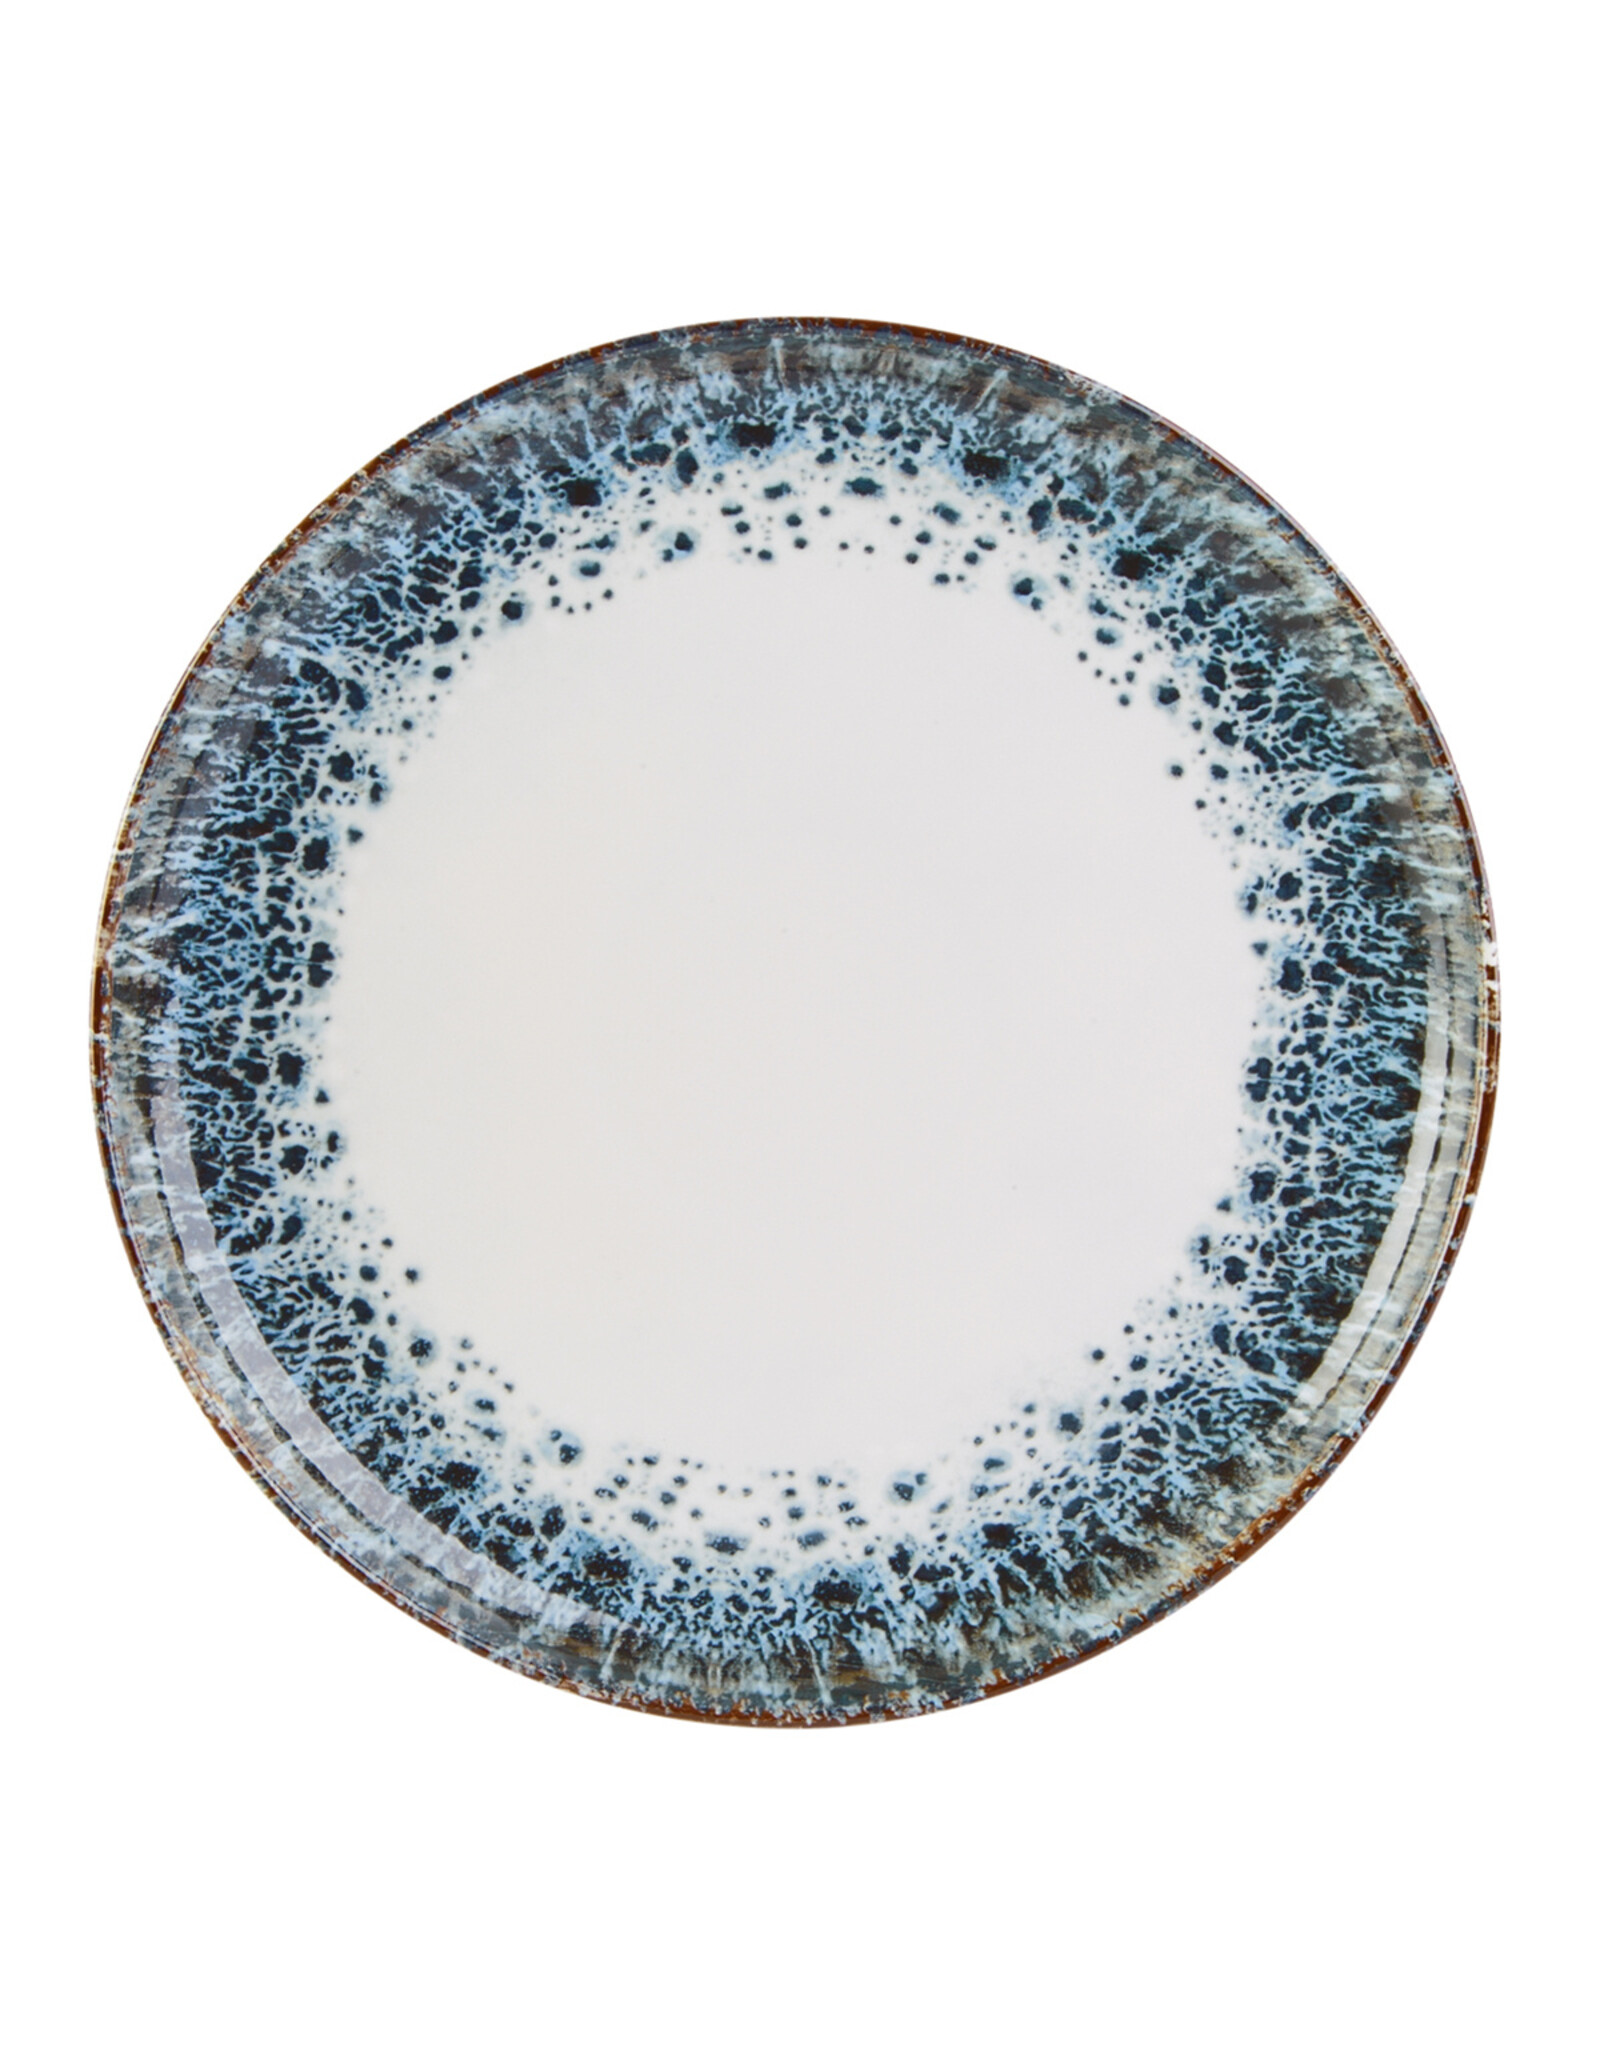 Stylepoint Reef coupe plate 21 cm